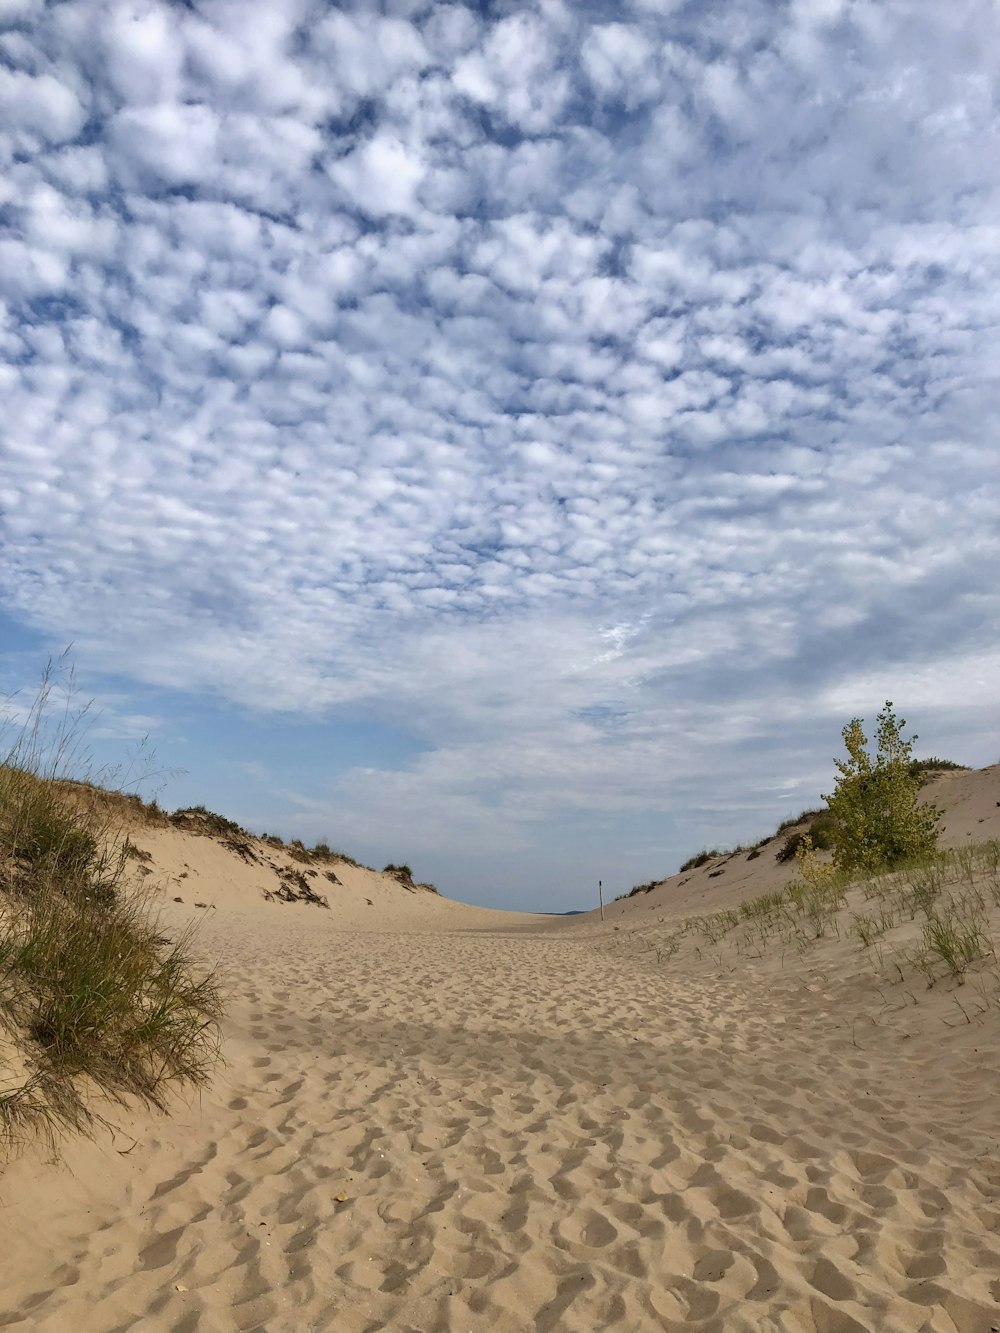 a sandy path leading to the ocean under a cloudy sky